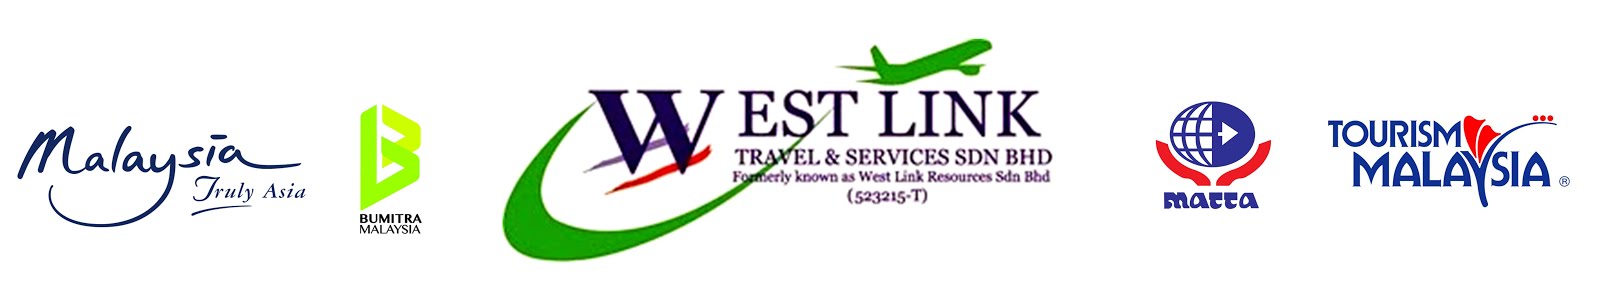 West Link Travel & Services